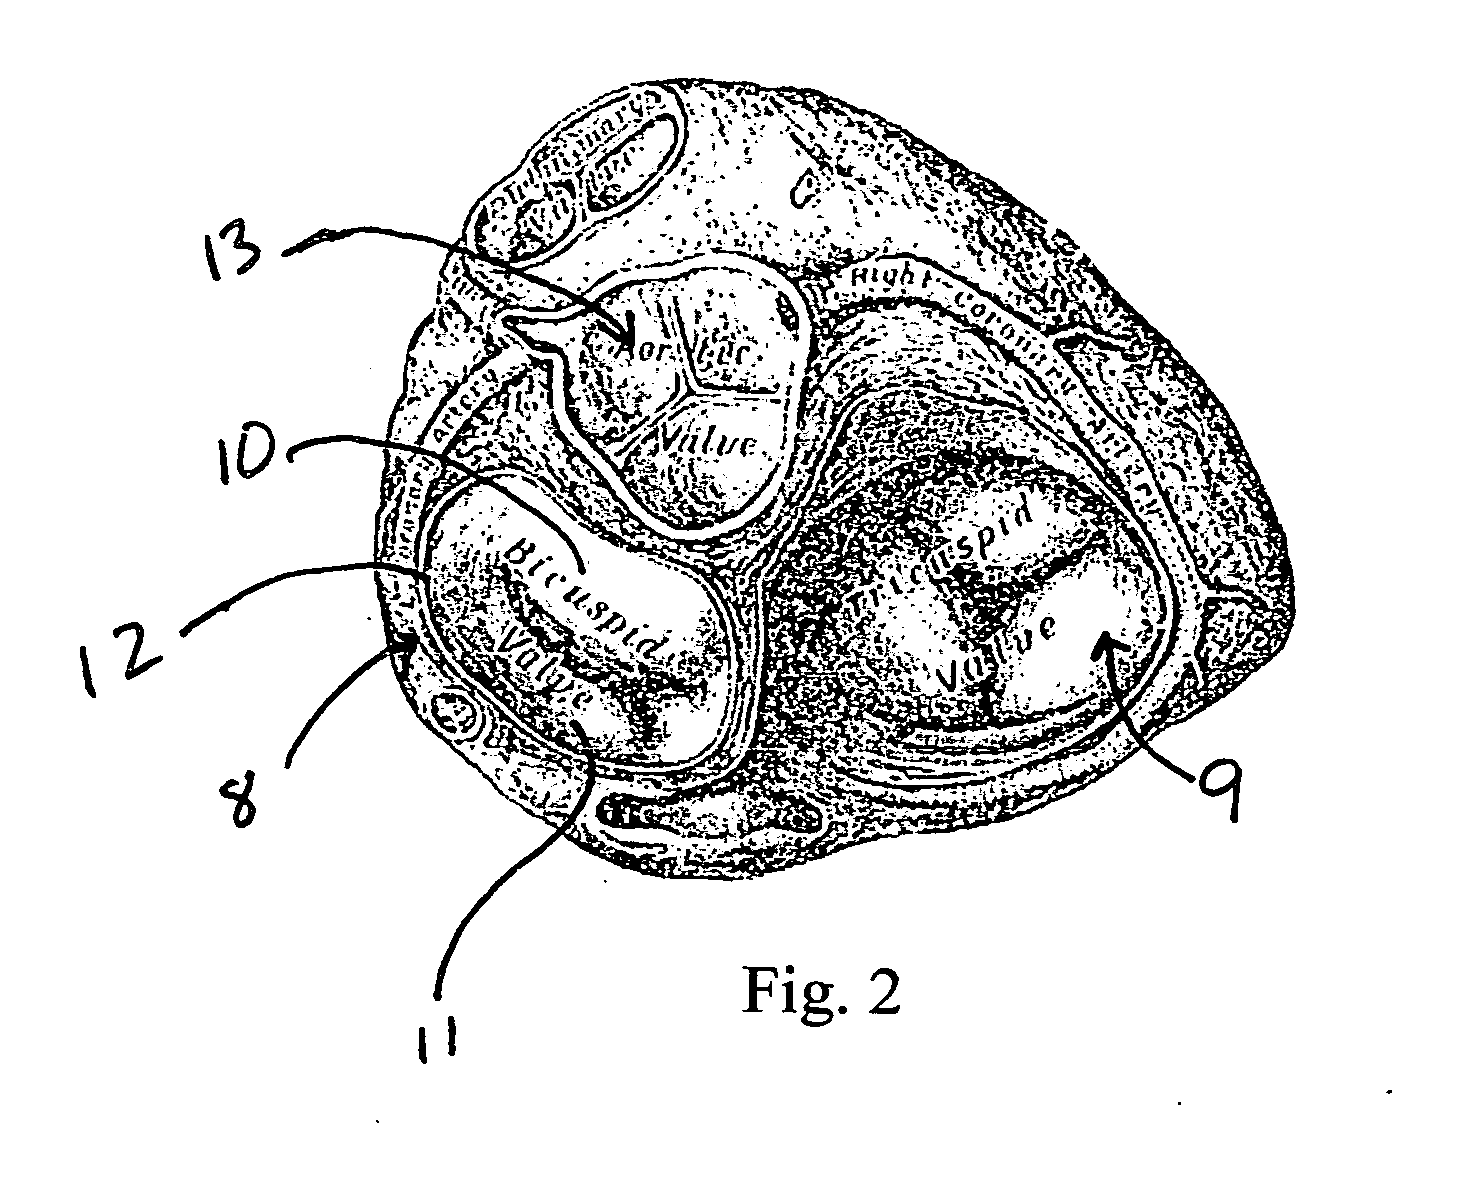 Anchoring and tethering system